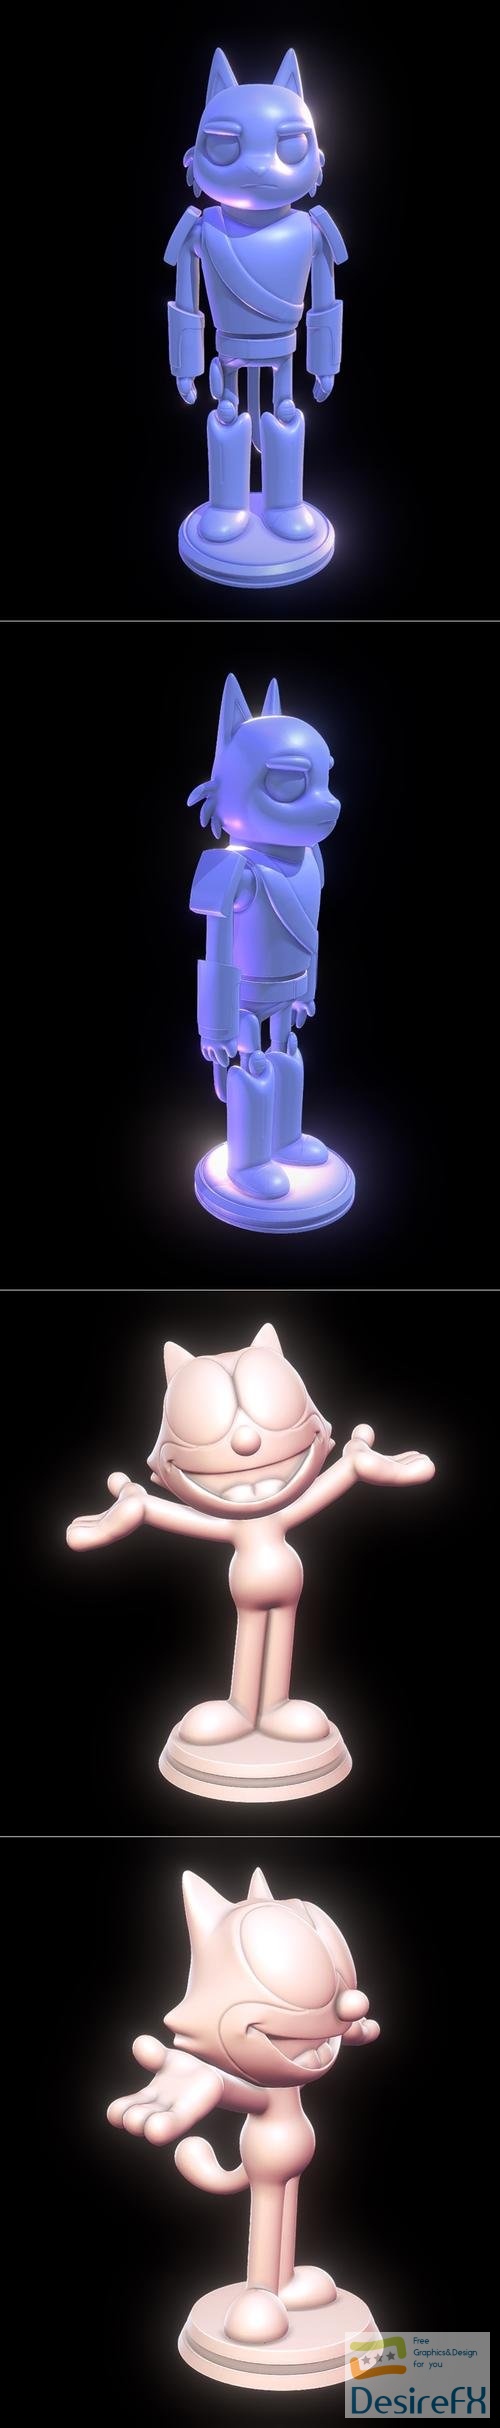 Avocato - Final Space and Felix the Cat – 3D Print